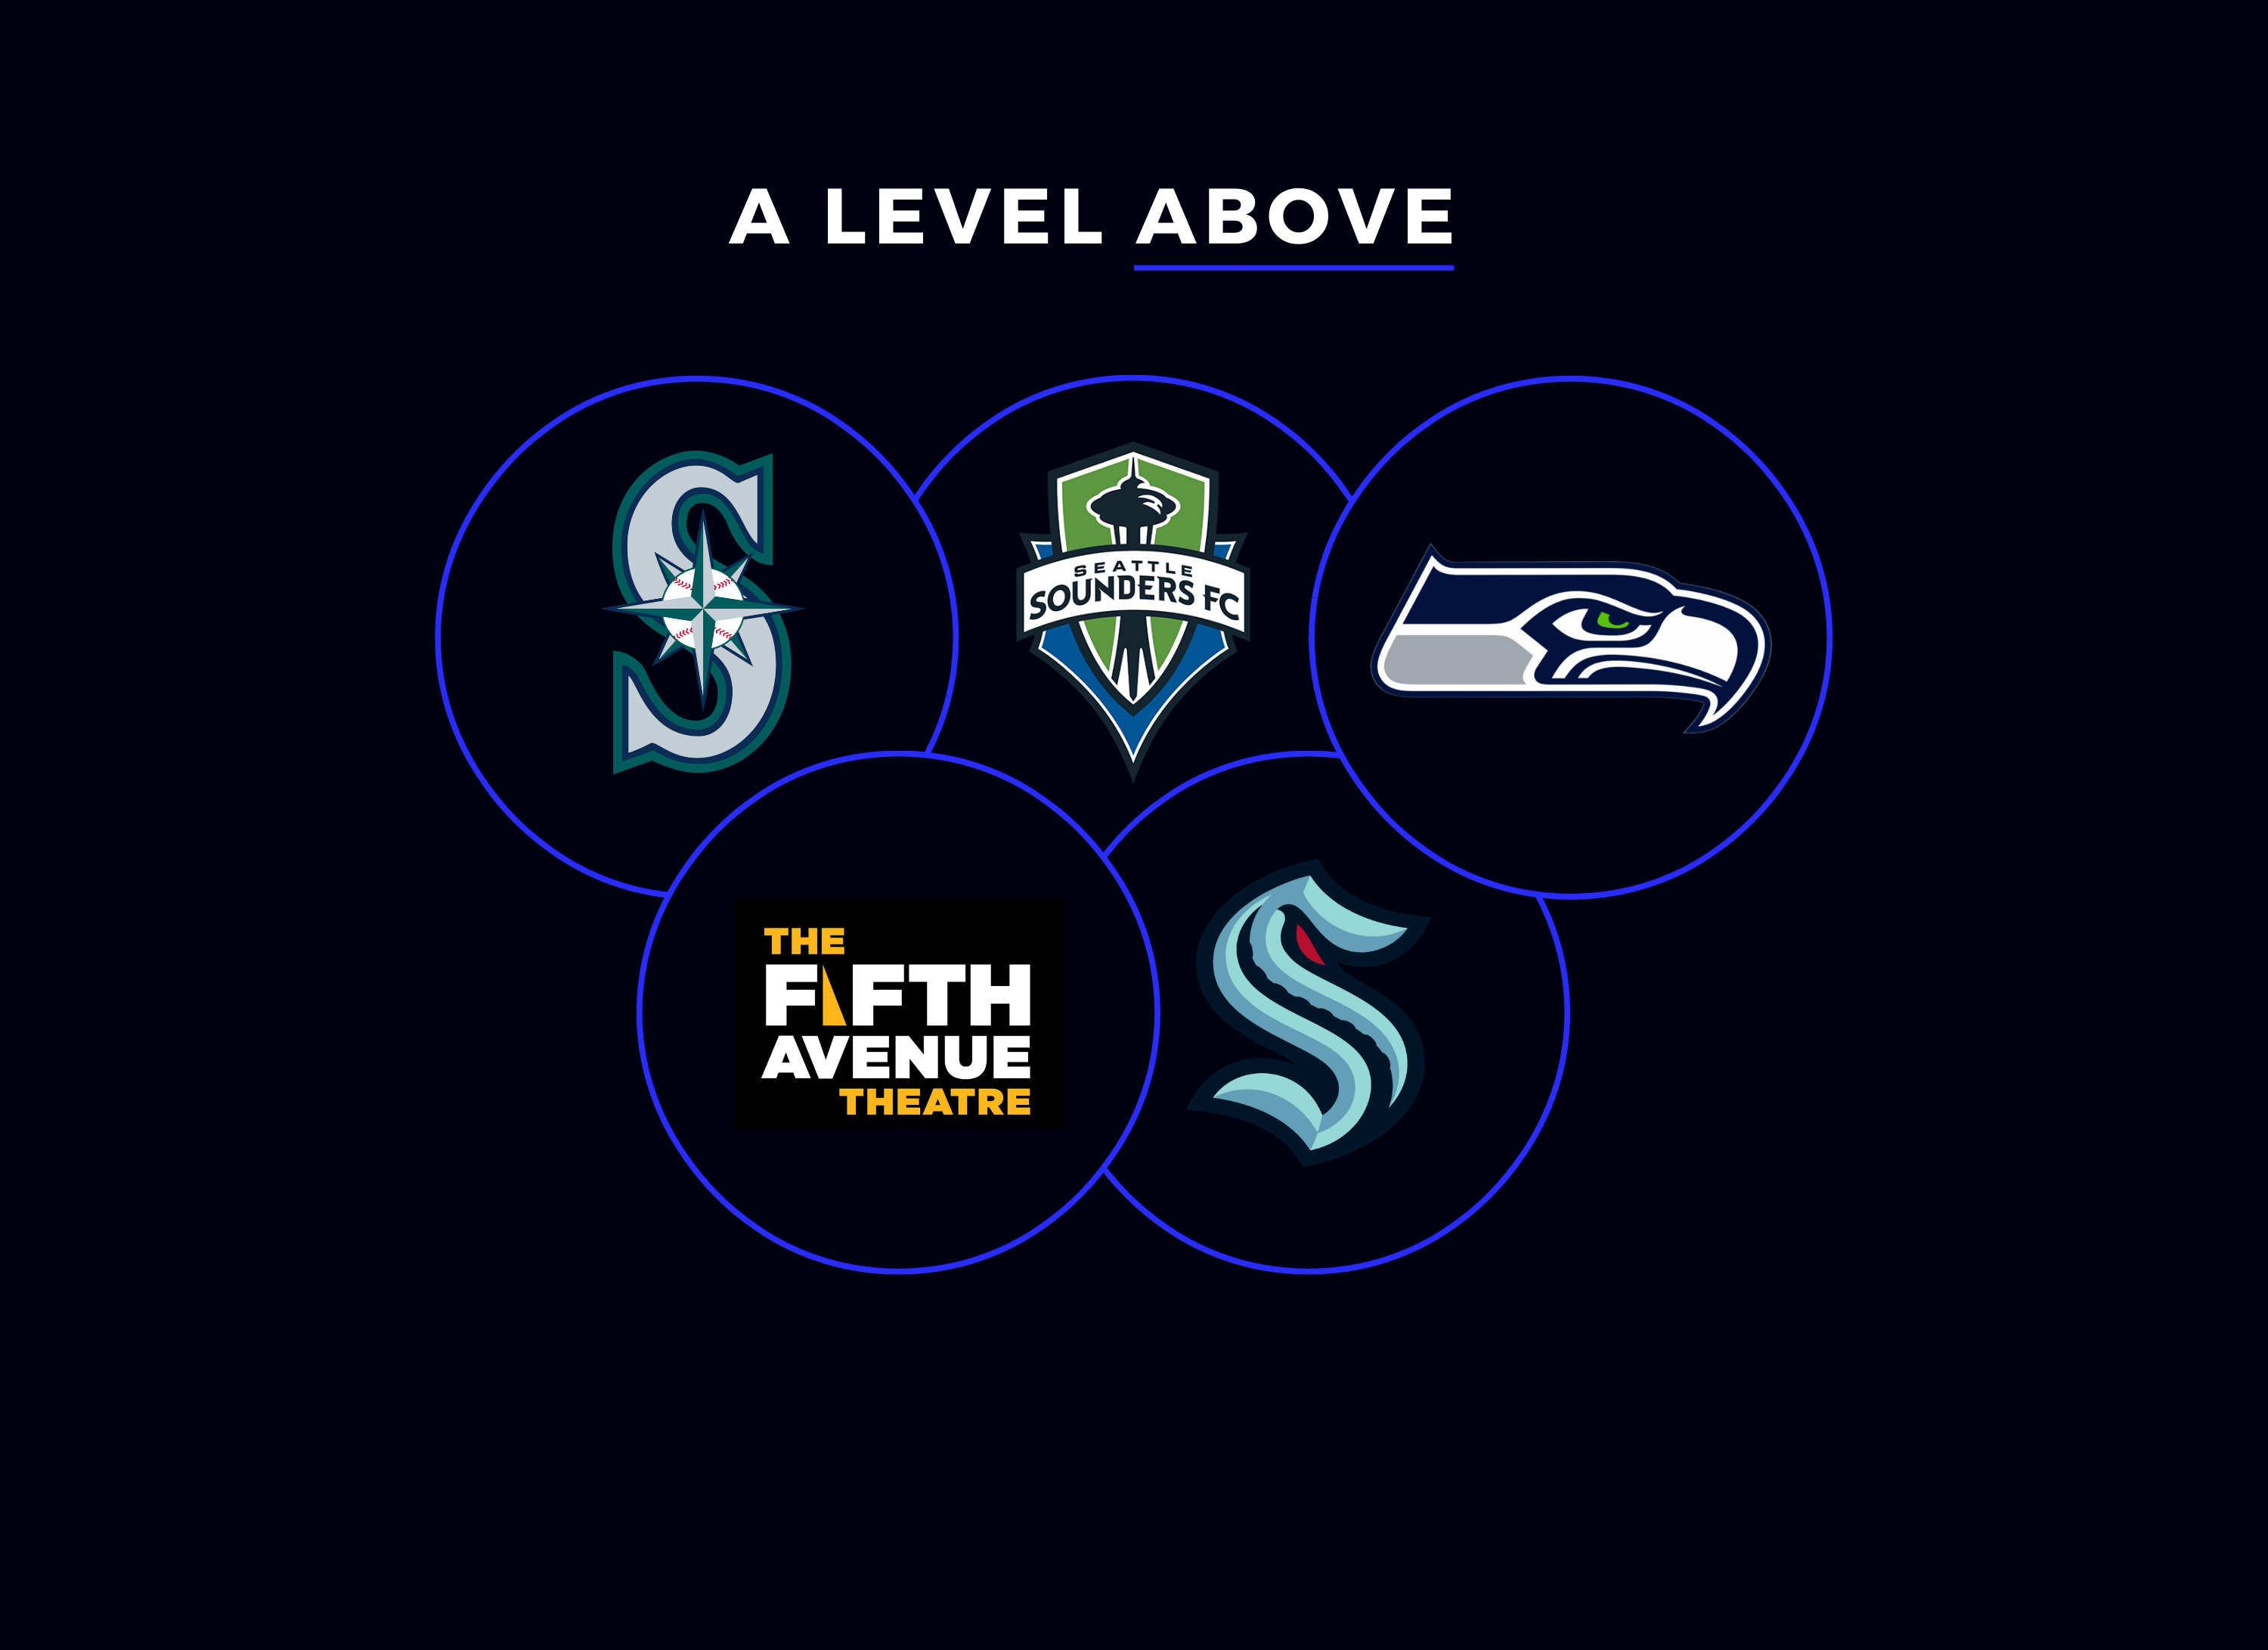 Free Seattle Seahawks, Kraken, Sounders, Mariners and 5th Avenue Theatre  tickets